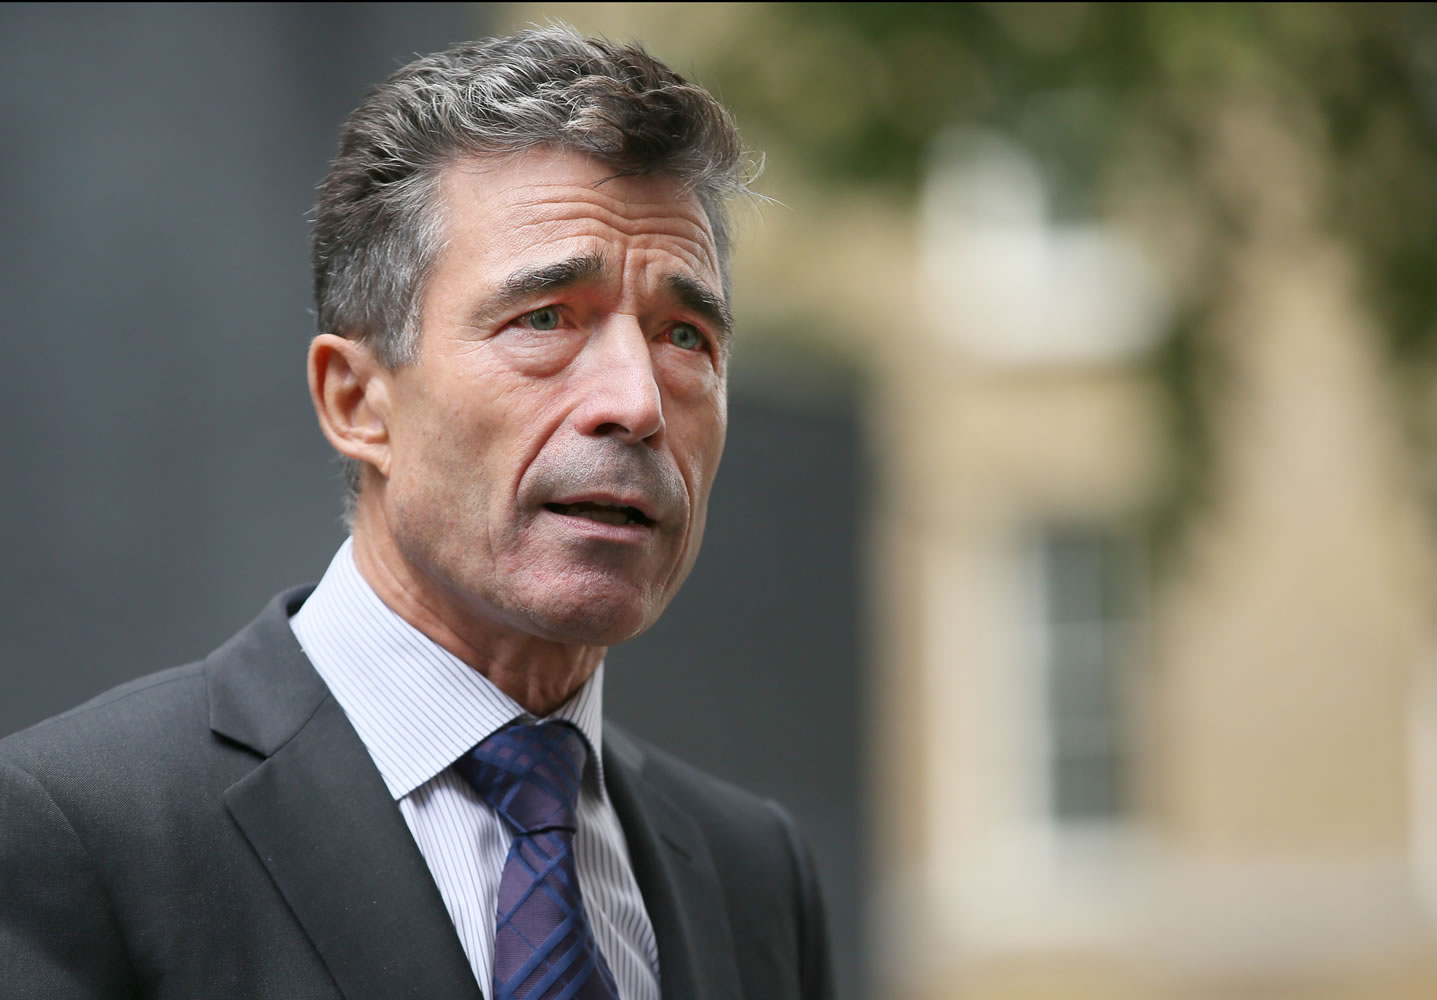 NATO Secretary General Anders Fogh Rasmussen speaks to the media after a meeting with Britain's Prime Minister David Cameron in 10 Downing Street in London on Wednesday.